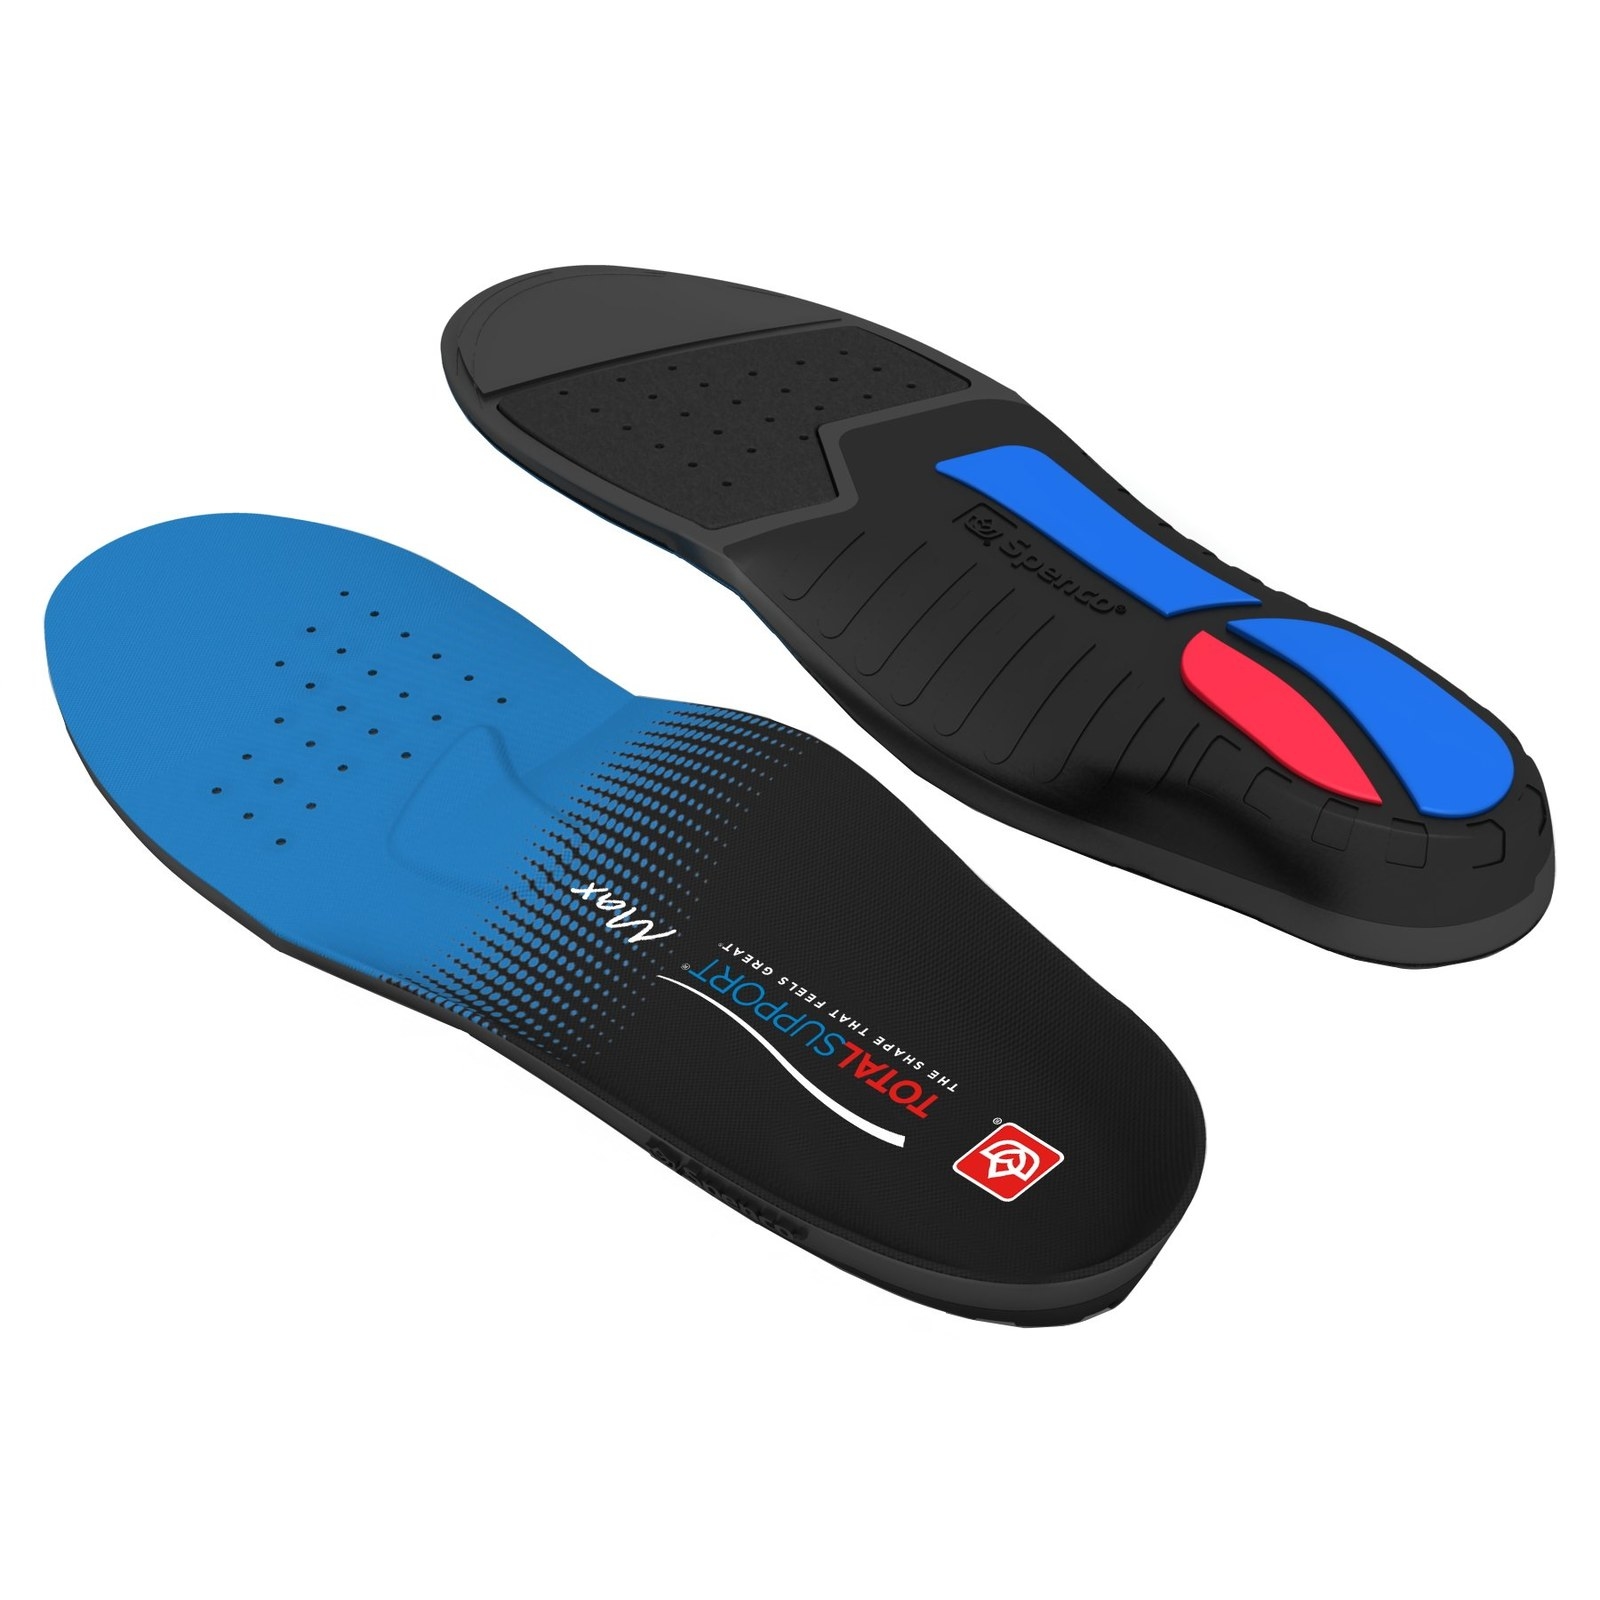 good insoles for shoes